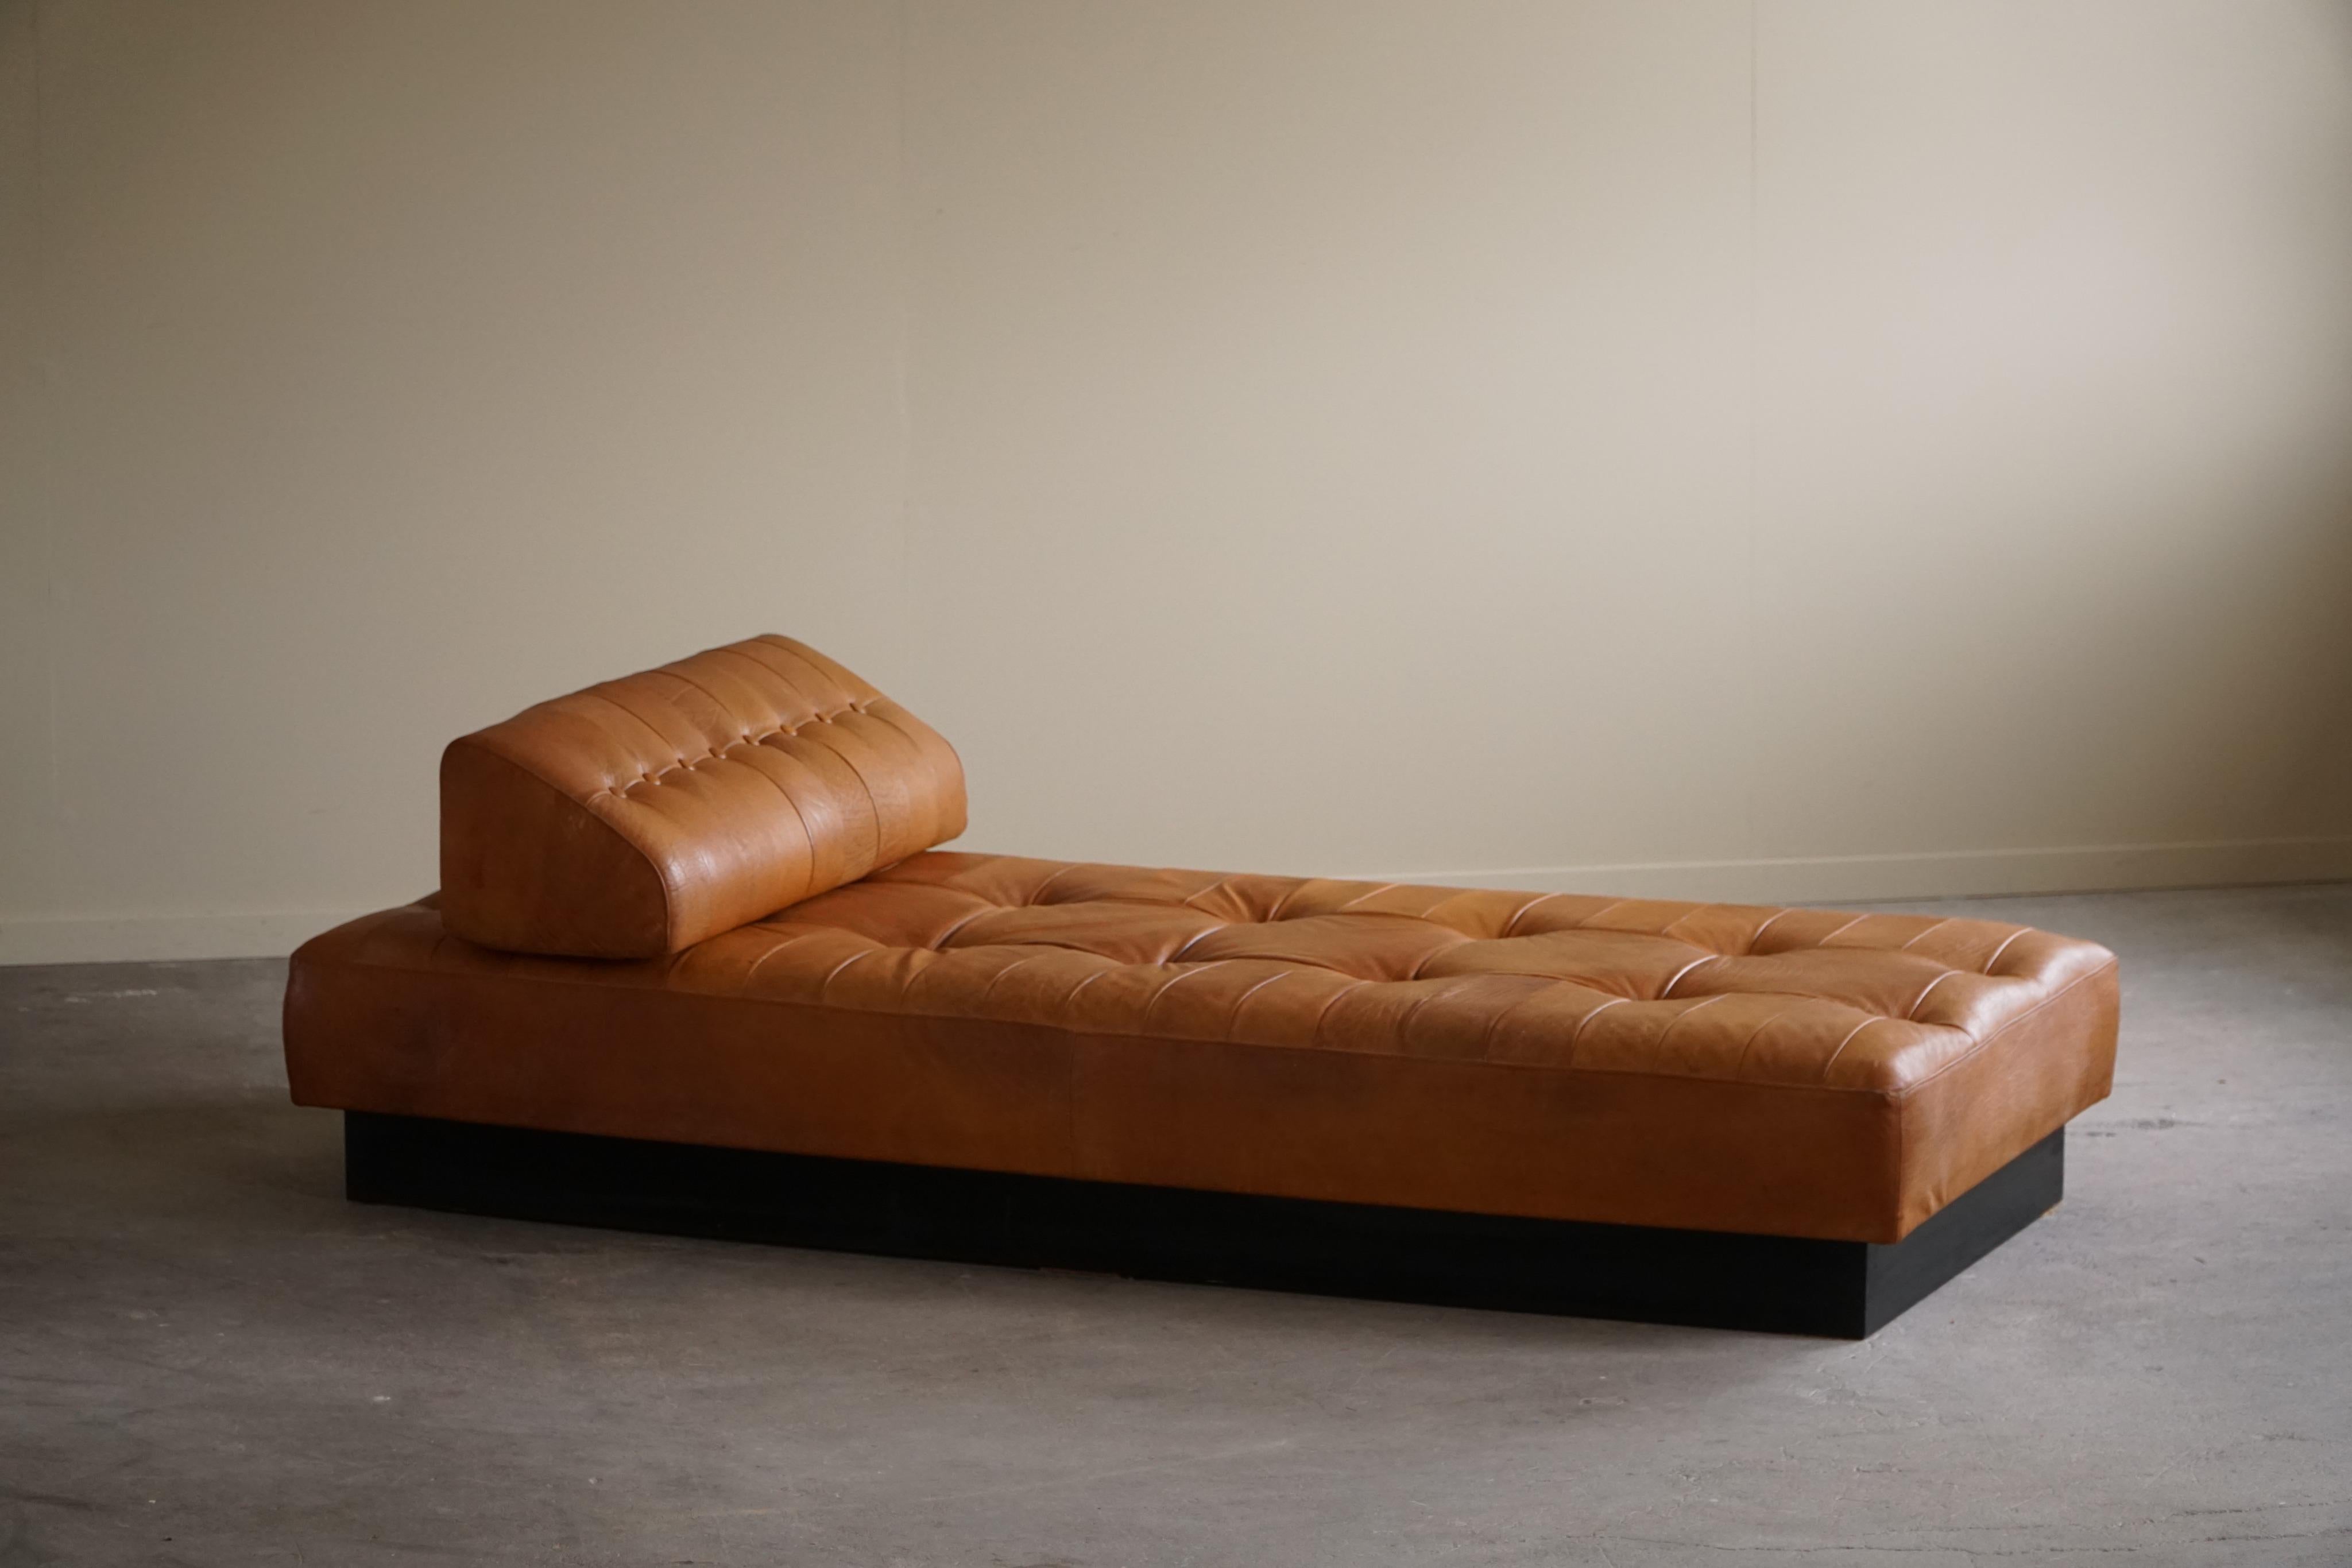 Danish Mid-Century Modern Daybed/Sofa in Cognac Brown Leather, Made in 1960s 3